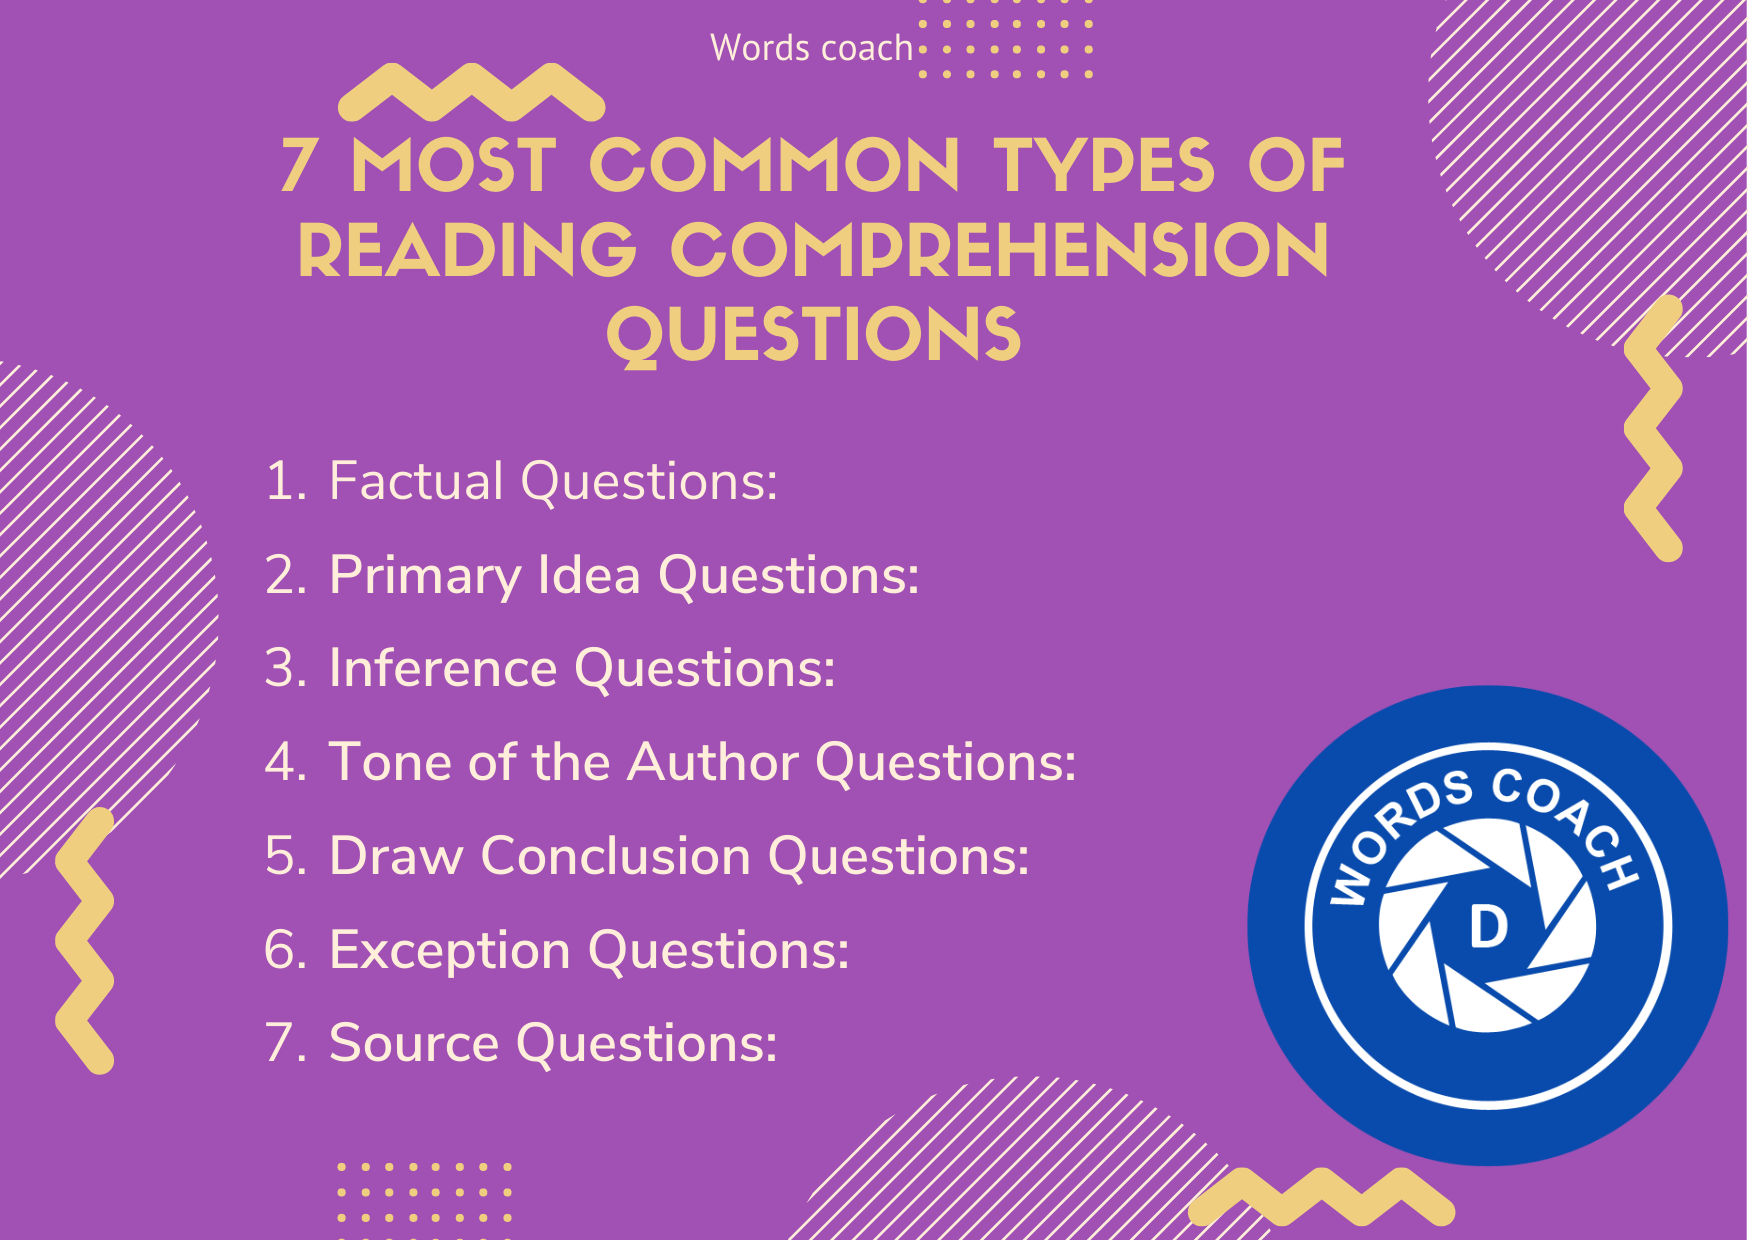 7 most common types of Reading Comprehension questions